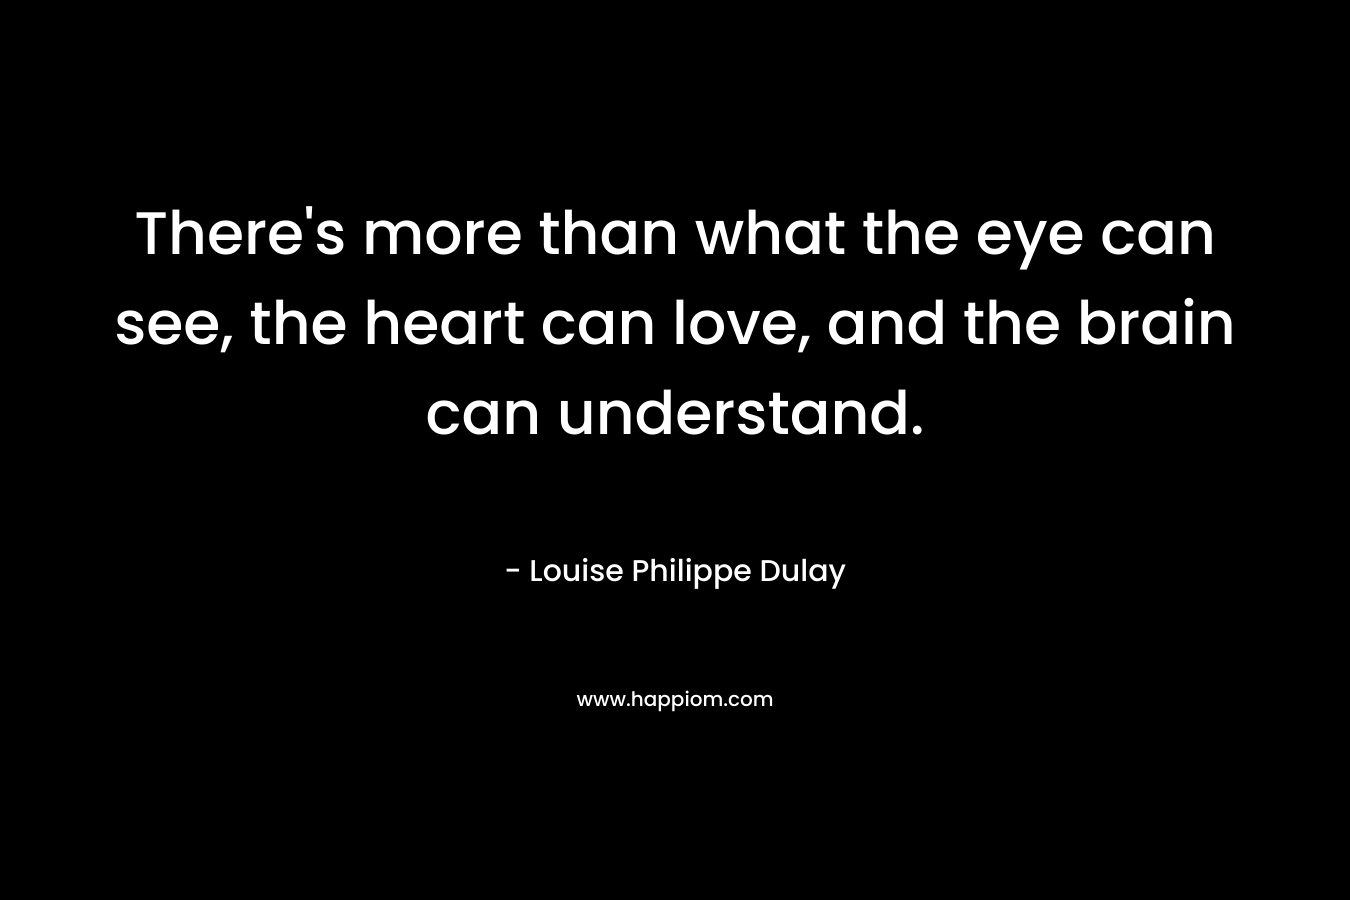 There's more than what the eye can see, the heart can love, and the brain can understand.